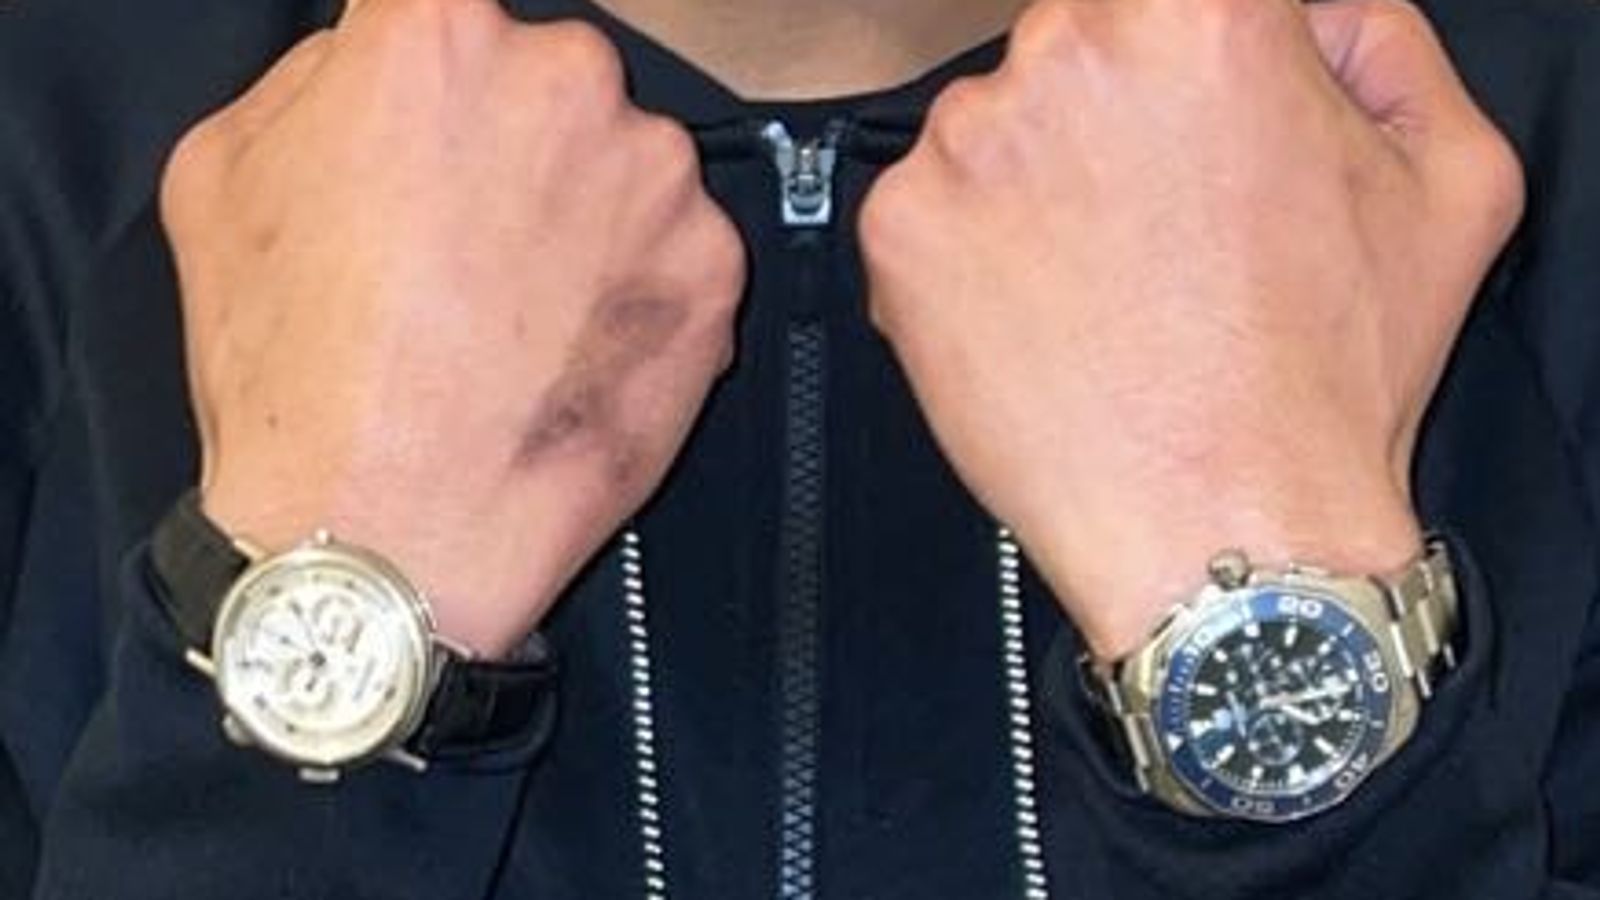 Selling stolen watches 'now more lucrative than drugs' - and some victims fear for their lives